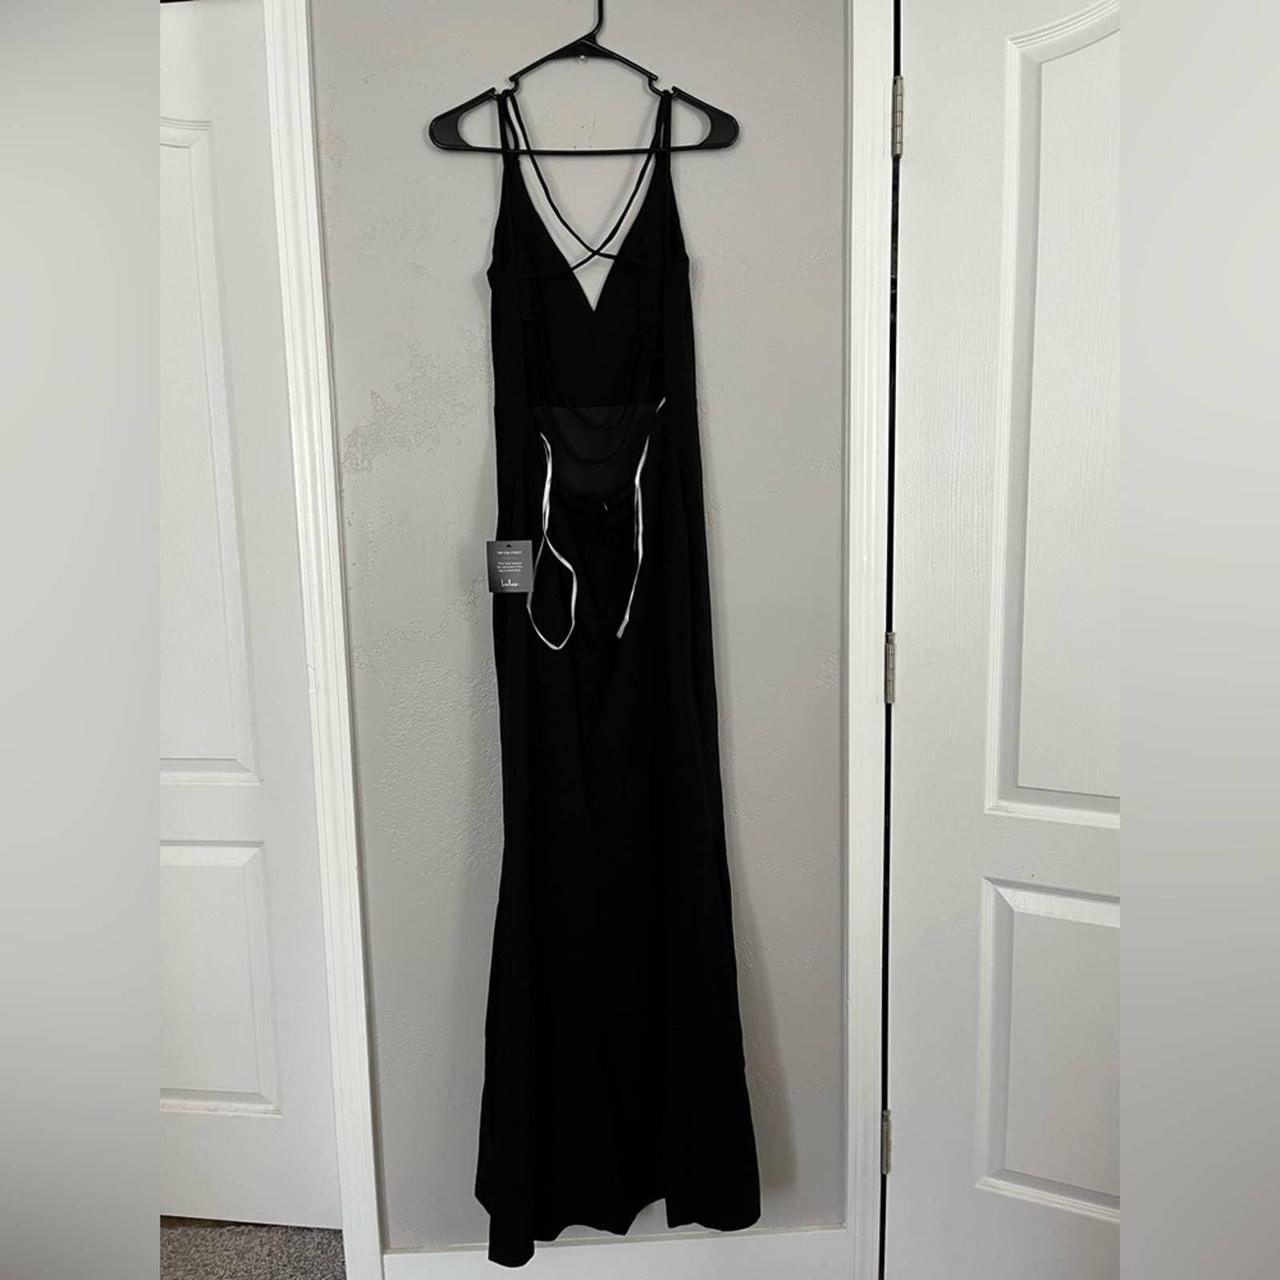 All this Allure Black Strappy Backless Mermaid Maxi Dress